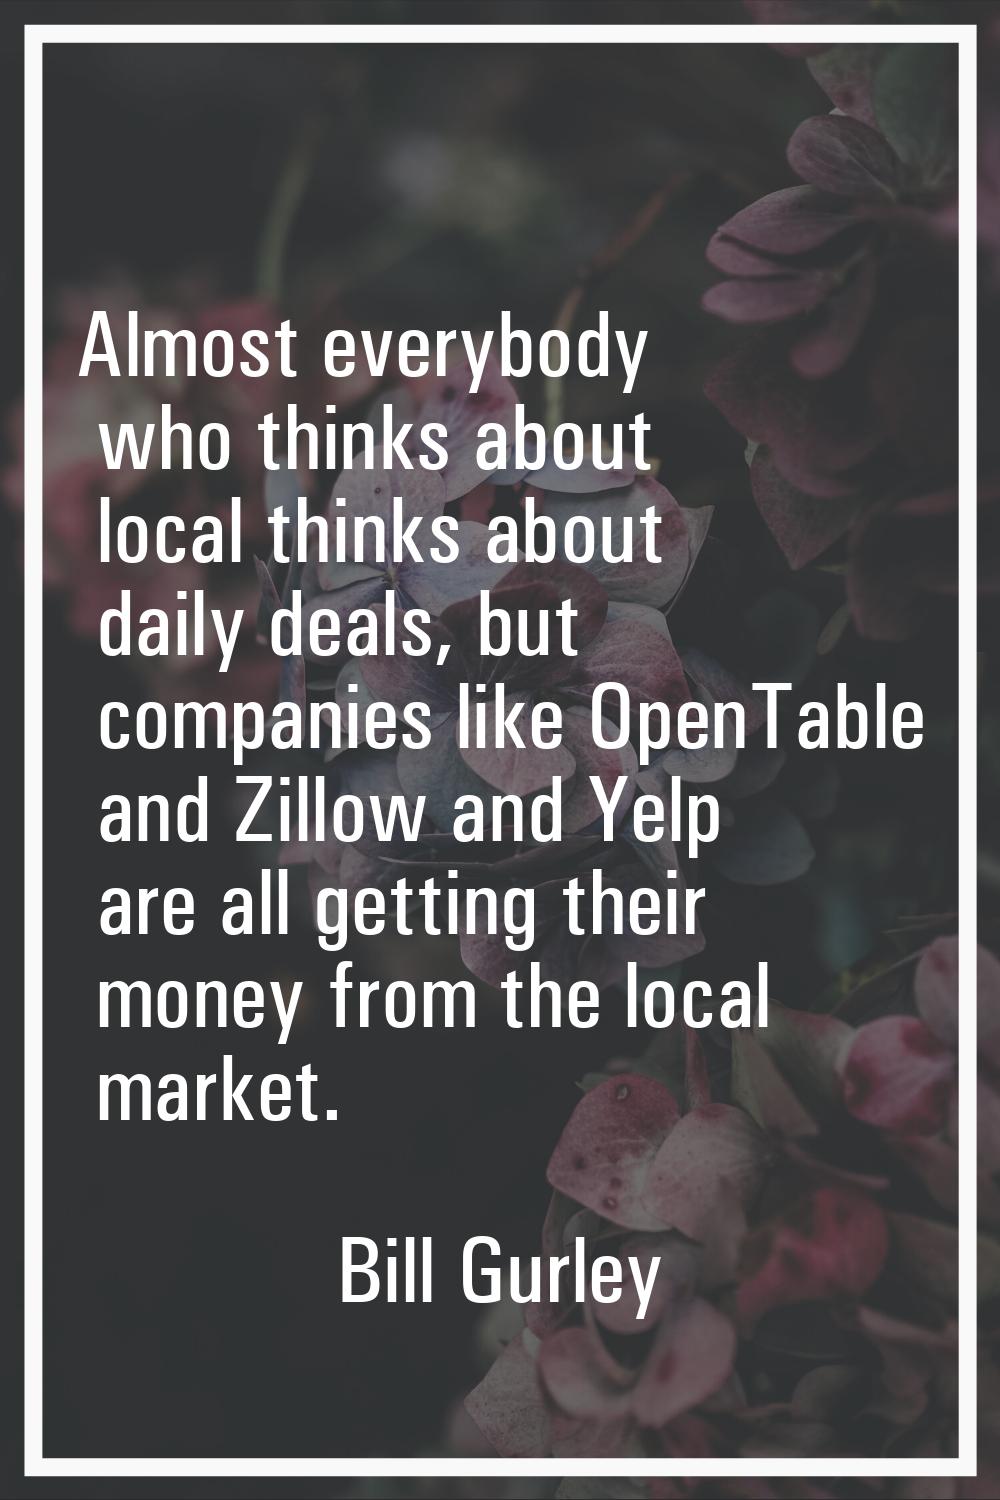 Almost everybody who thinks about local thinks about daily deals, but companies like OpenTable and 